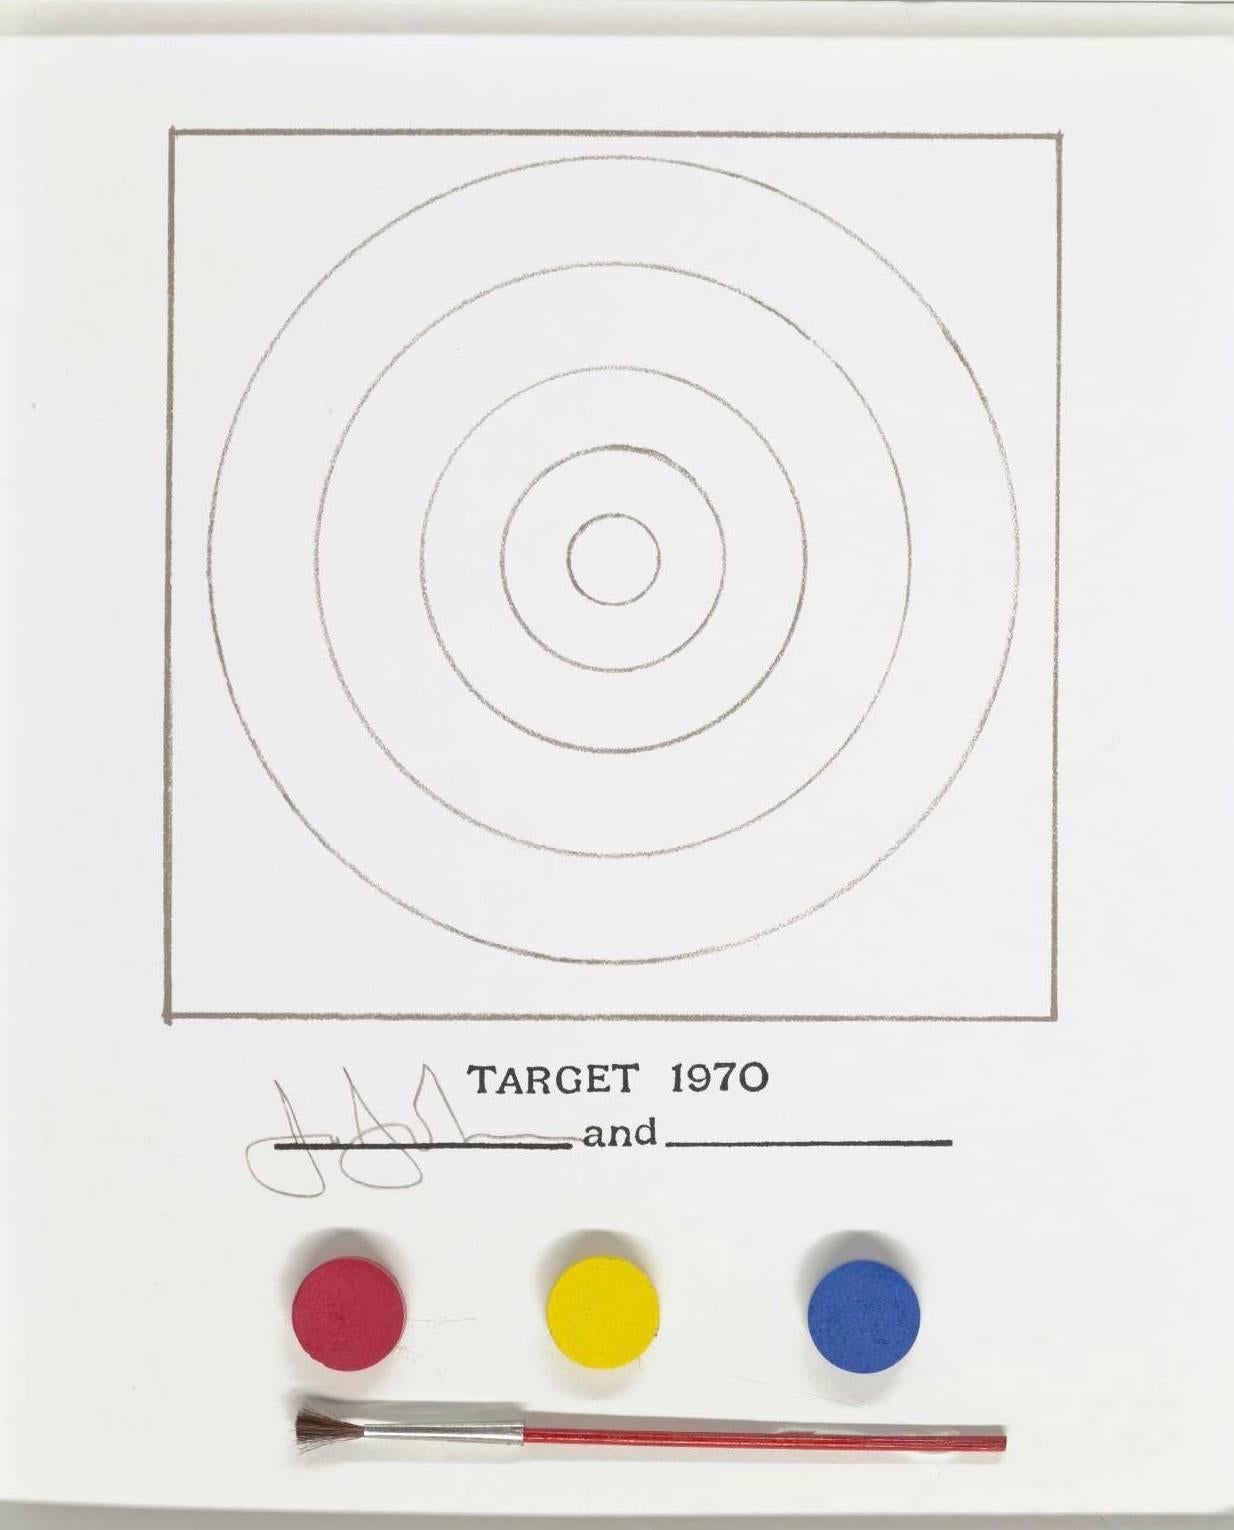 First edition, published by Gemini G.E.L. & MoMA, 1971.

Contained inside this white plastic box is the potential to create your own collaborative artwork with Jasper Johns. With three paints in the primary colors, a sheet of concentric circles